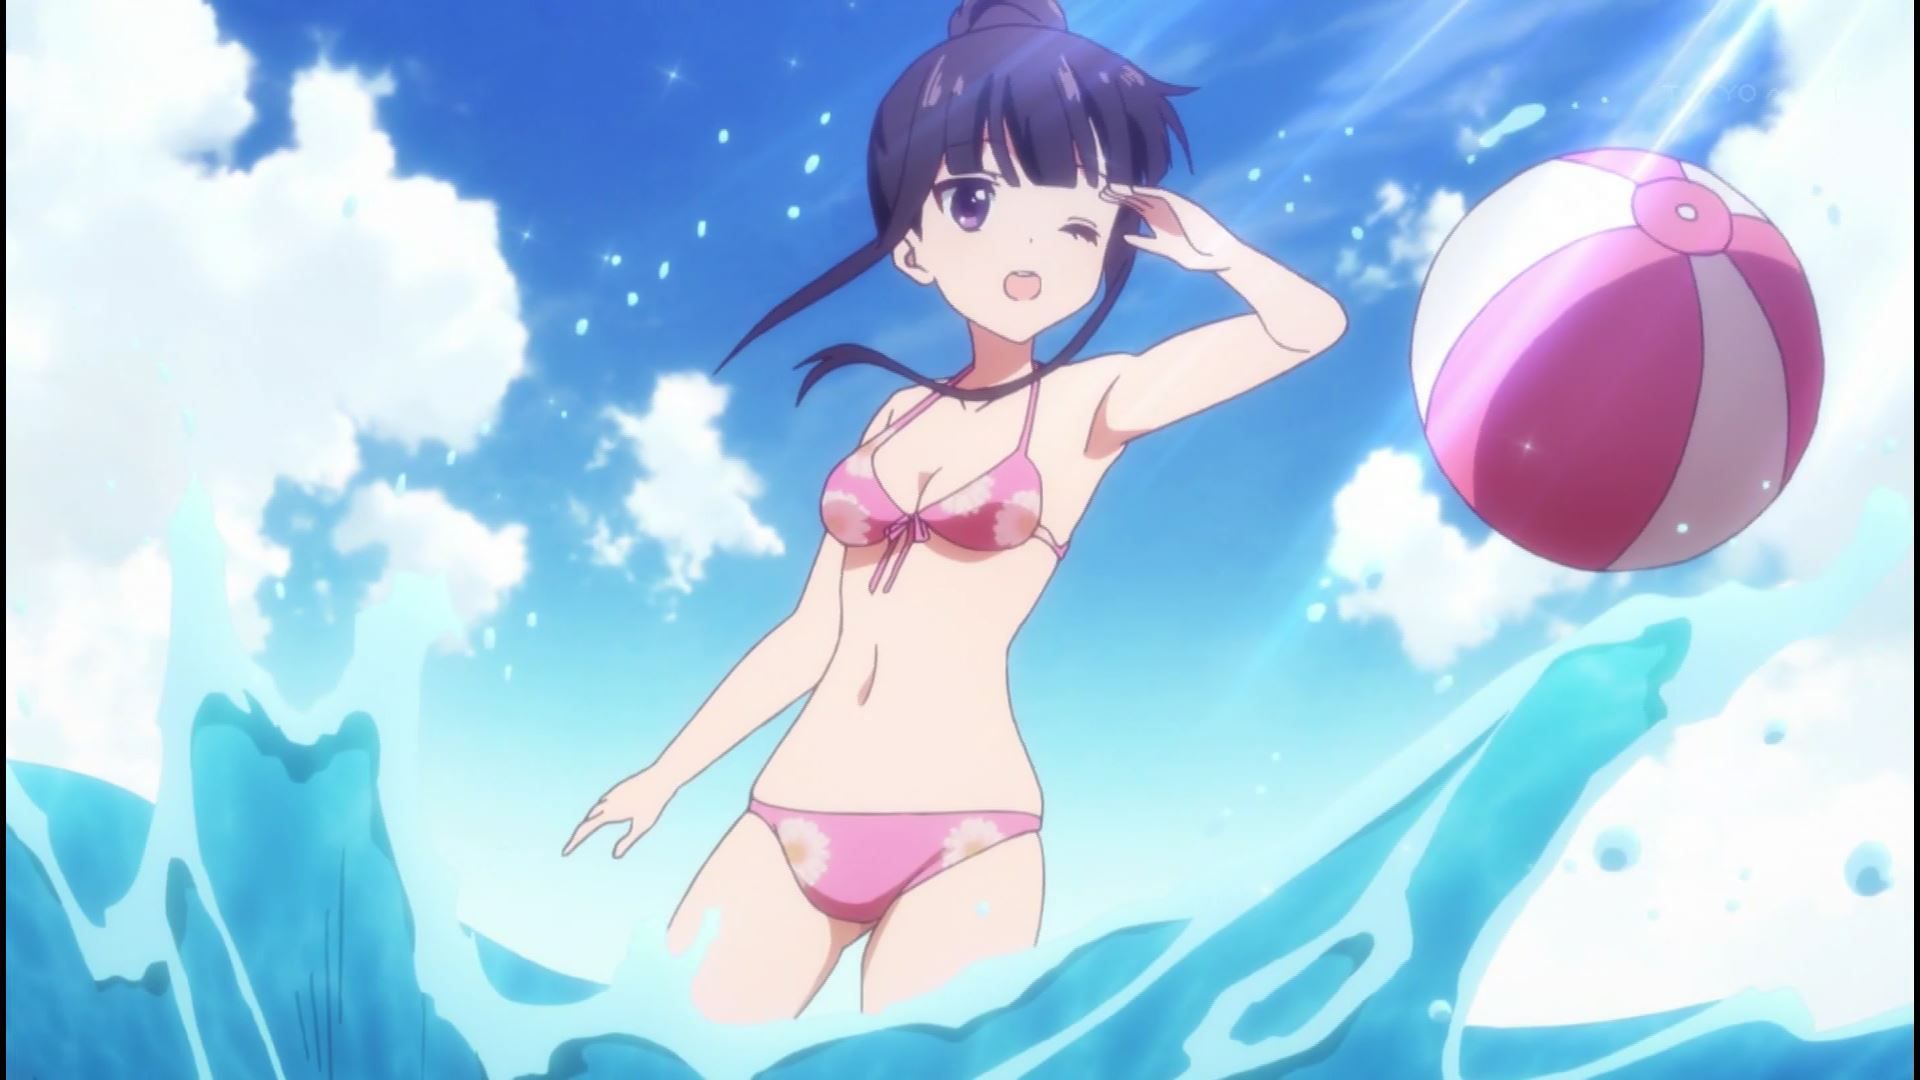 Anime ' blend S ' 6 episodes of girls erotic swimsuit times! such as breasts and buttocks! 18